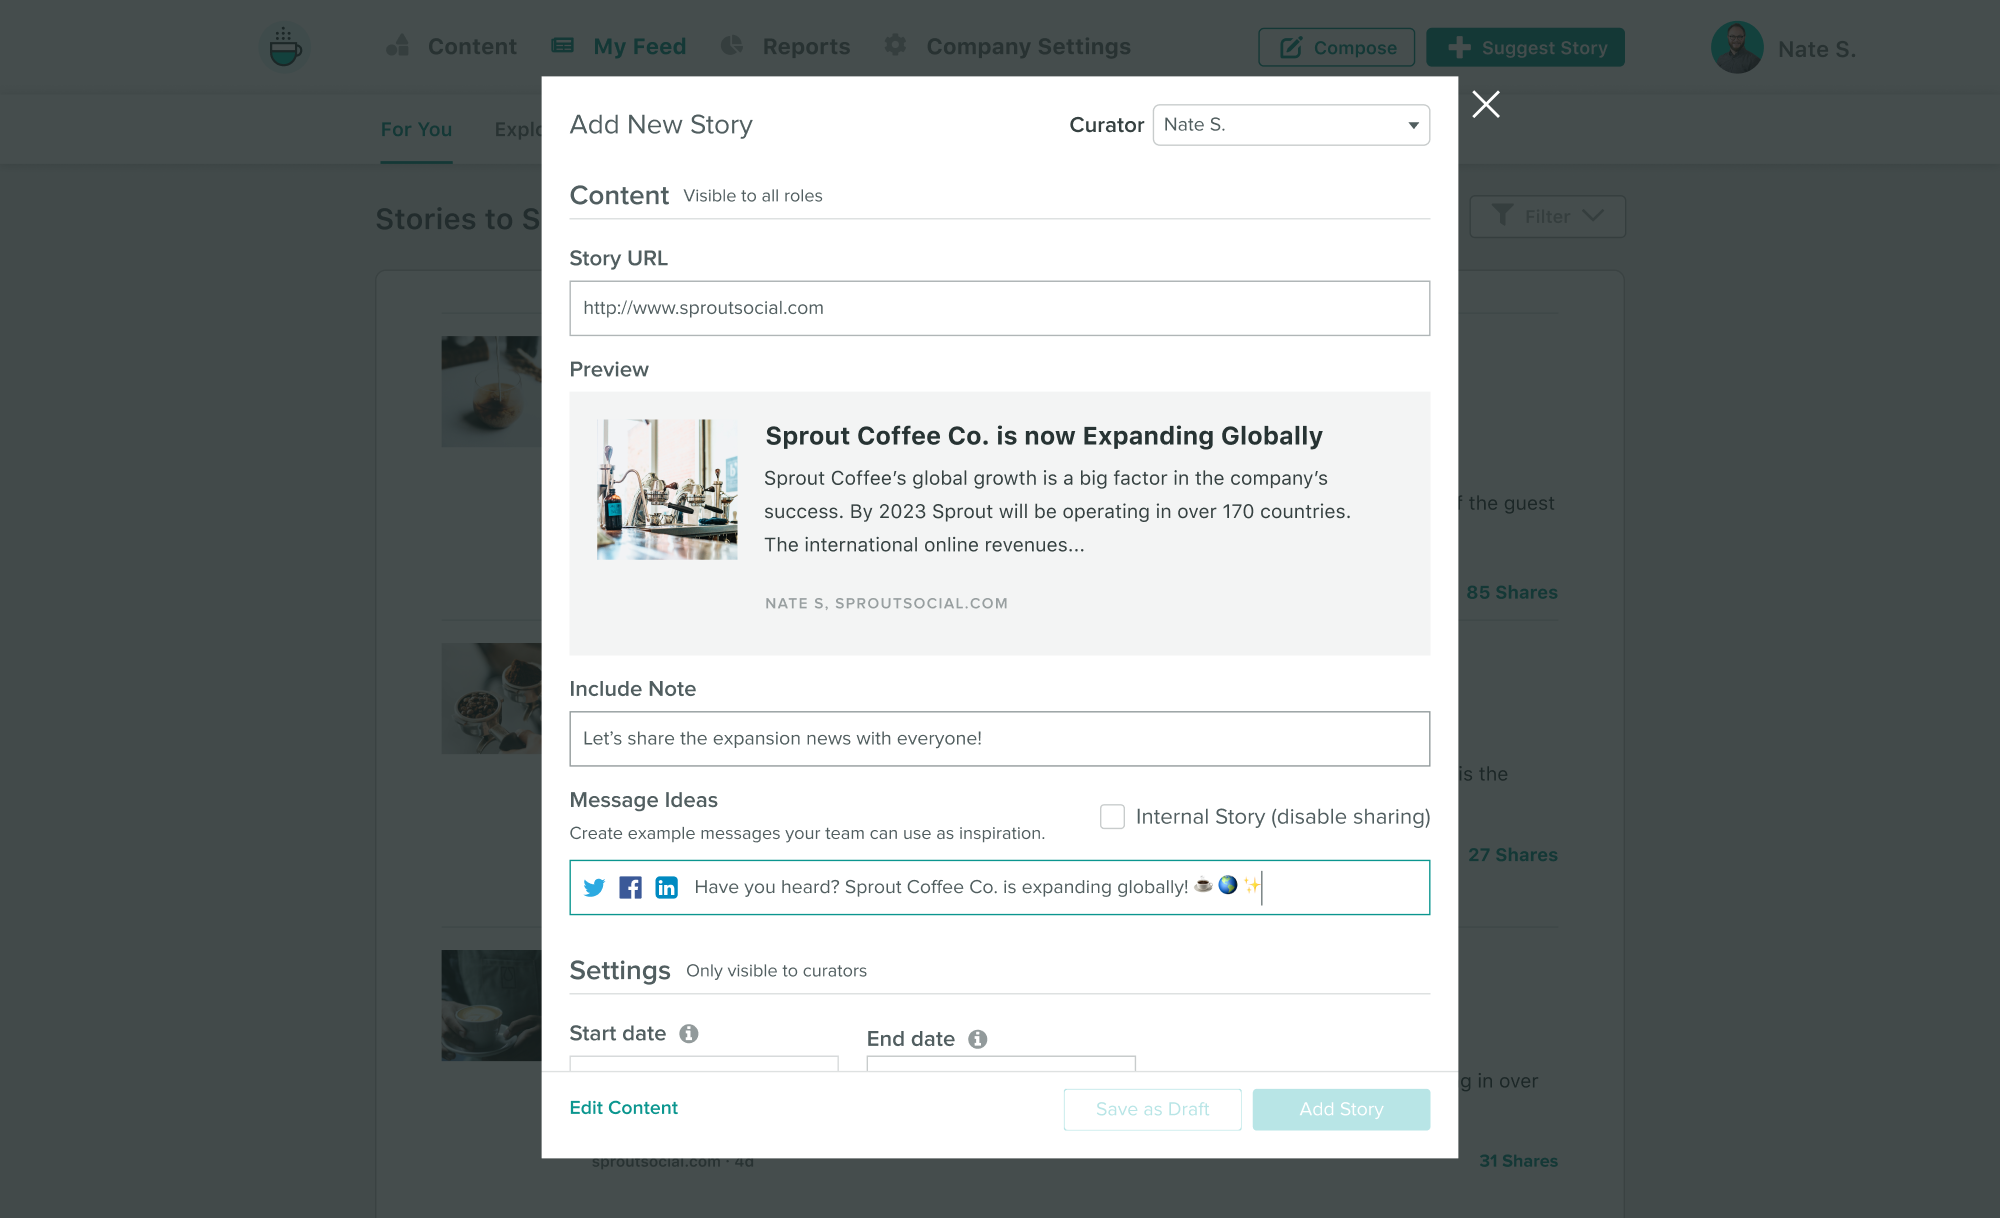 Sprout Social's Employee Advocacy solution